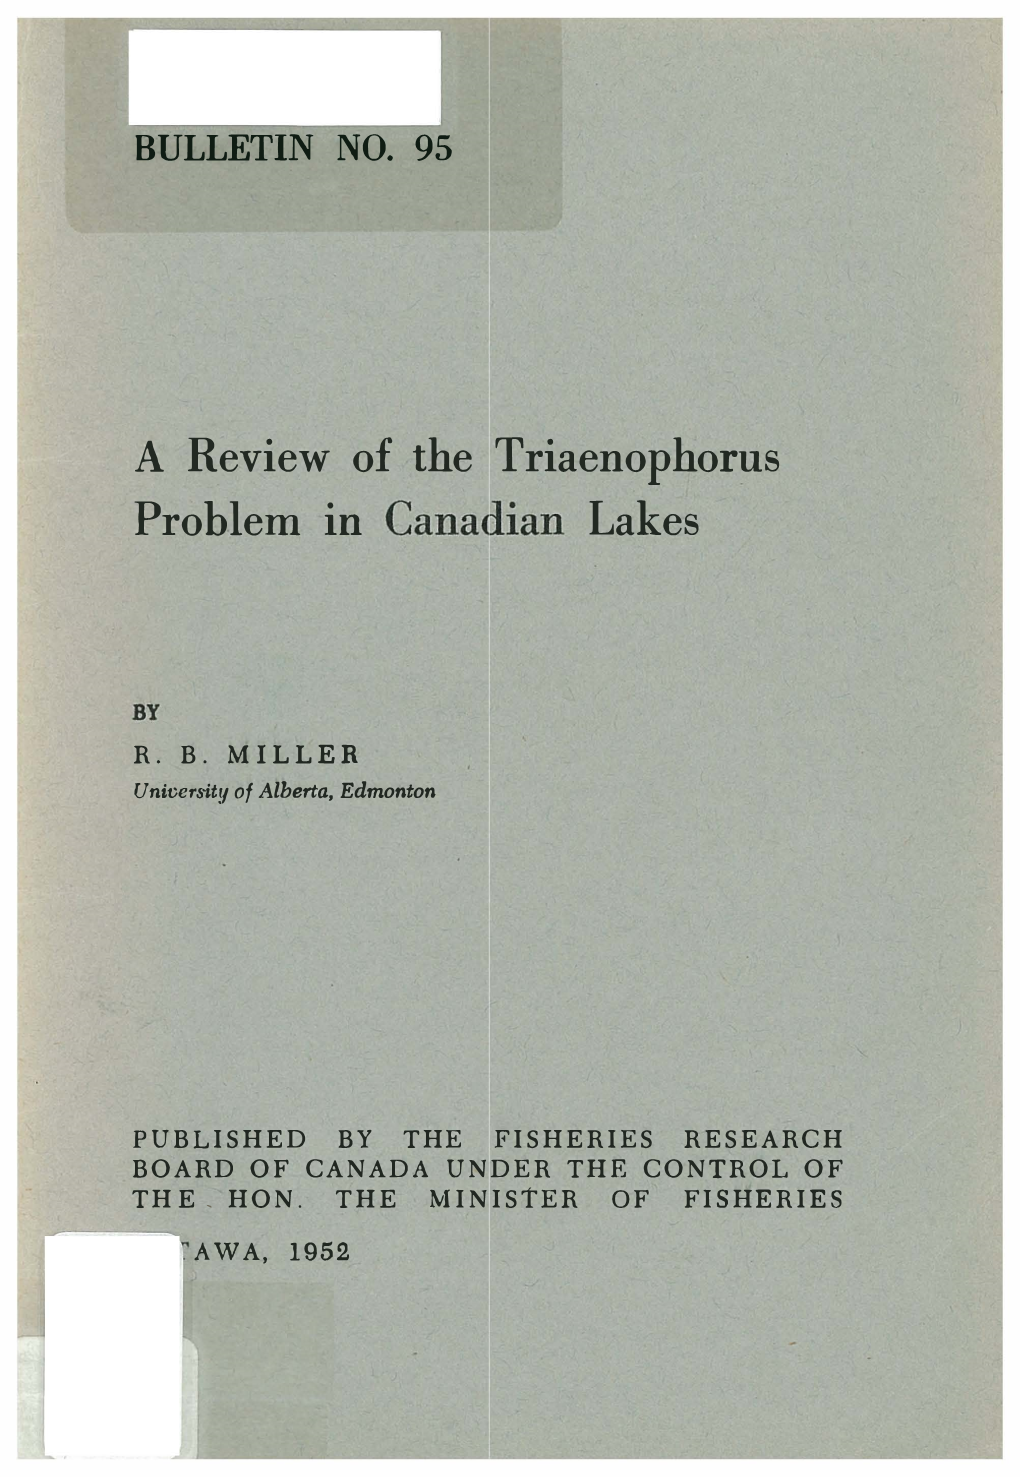 A Review of the Triaenophorus Problem in Cana4 Ian Lakes